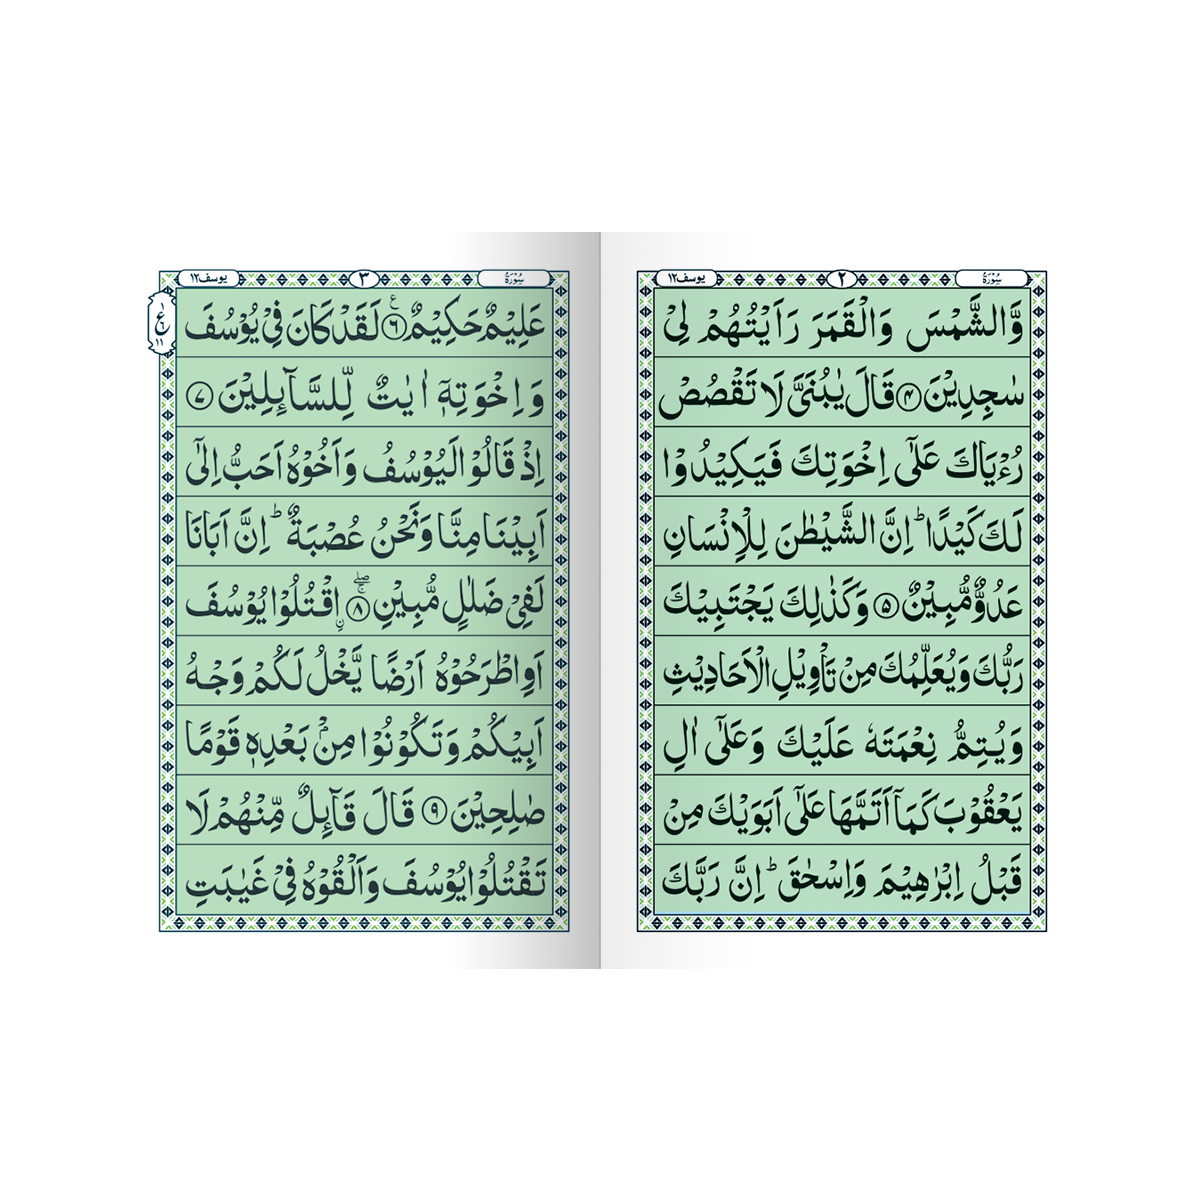 [IK215] Surah Yousuf In Big Letters (Without Translation)